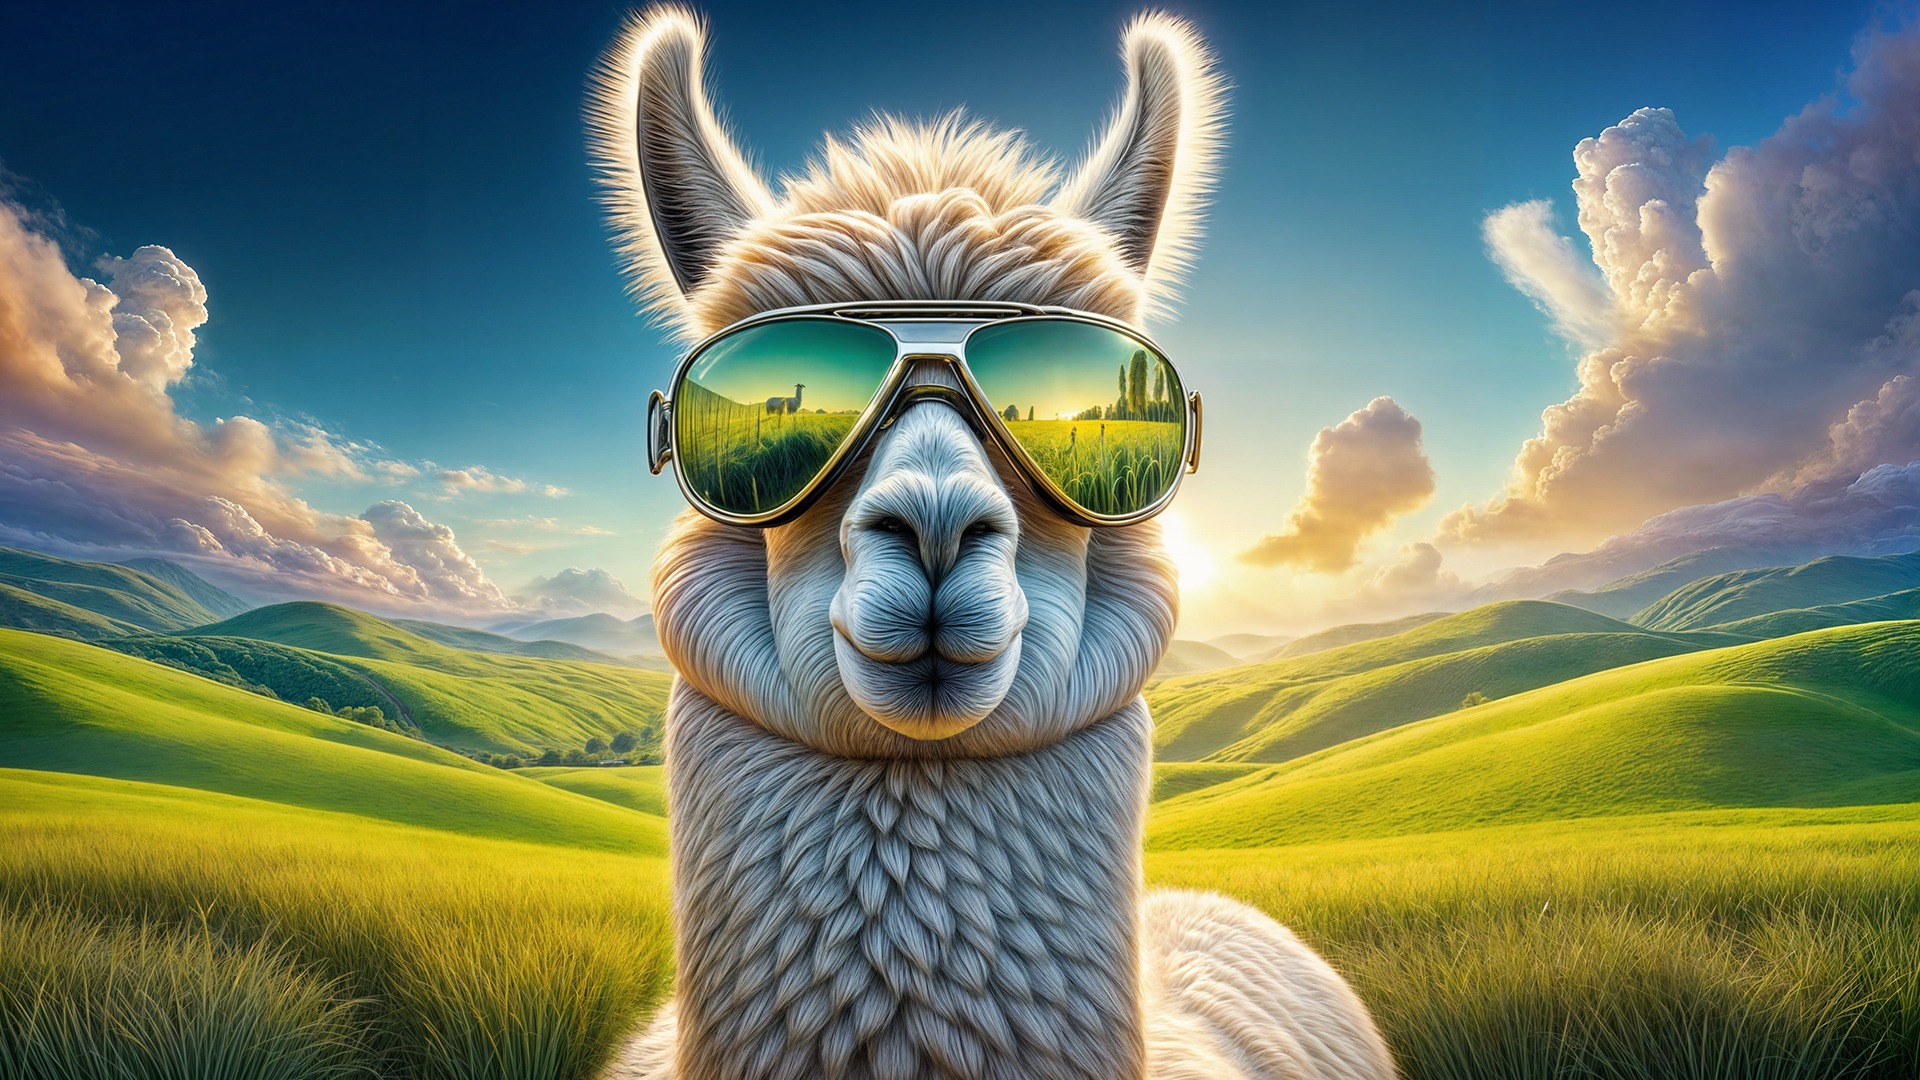 the parent company of  has released Llama 3.1, the largest-ever open-source AI m-452514923_798918169060691_524463307167400078_n 